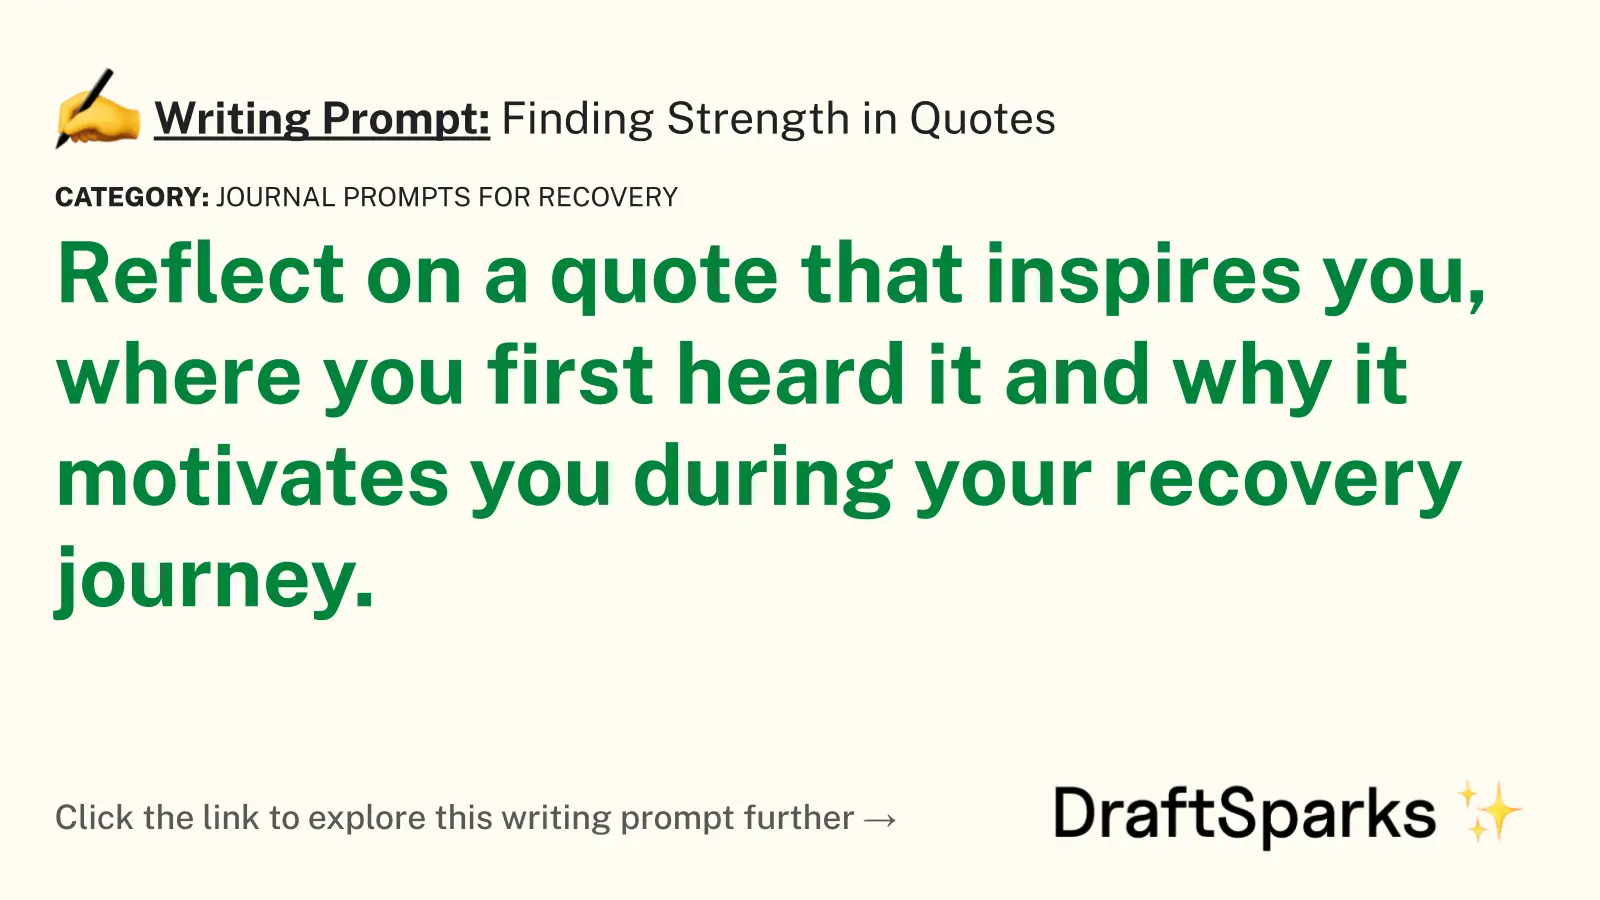 Finding Strength in Quotes